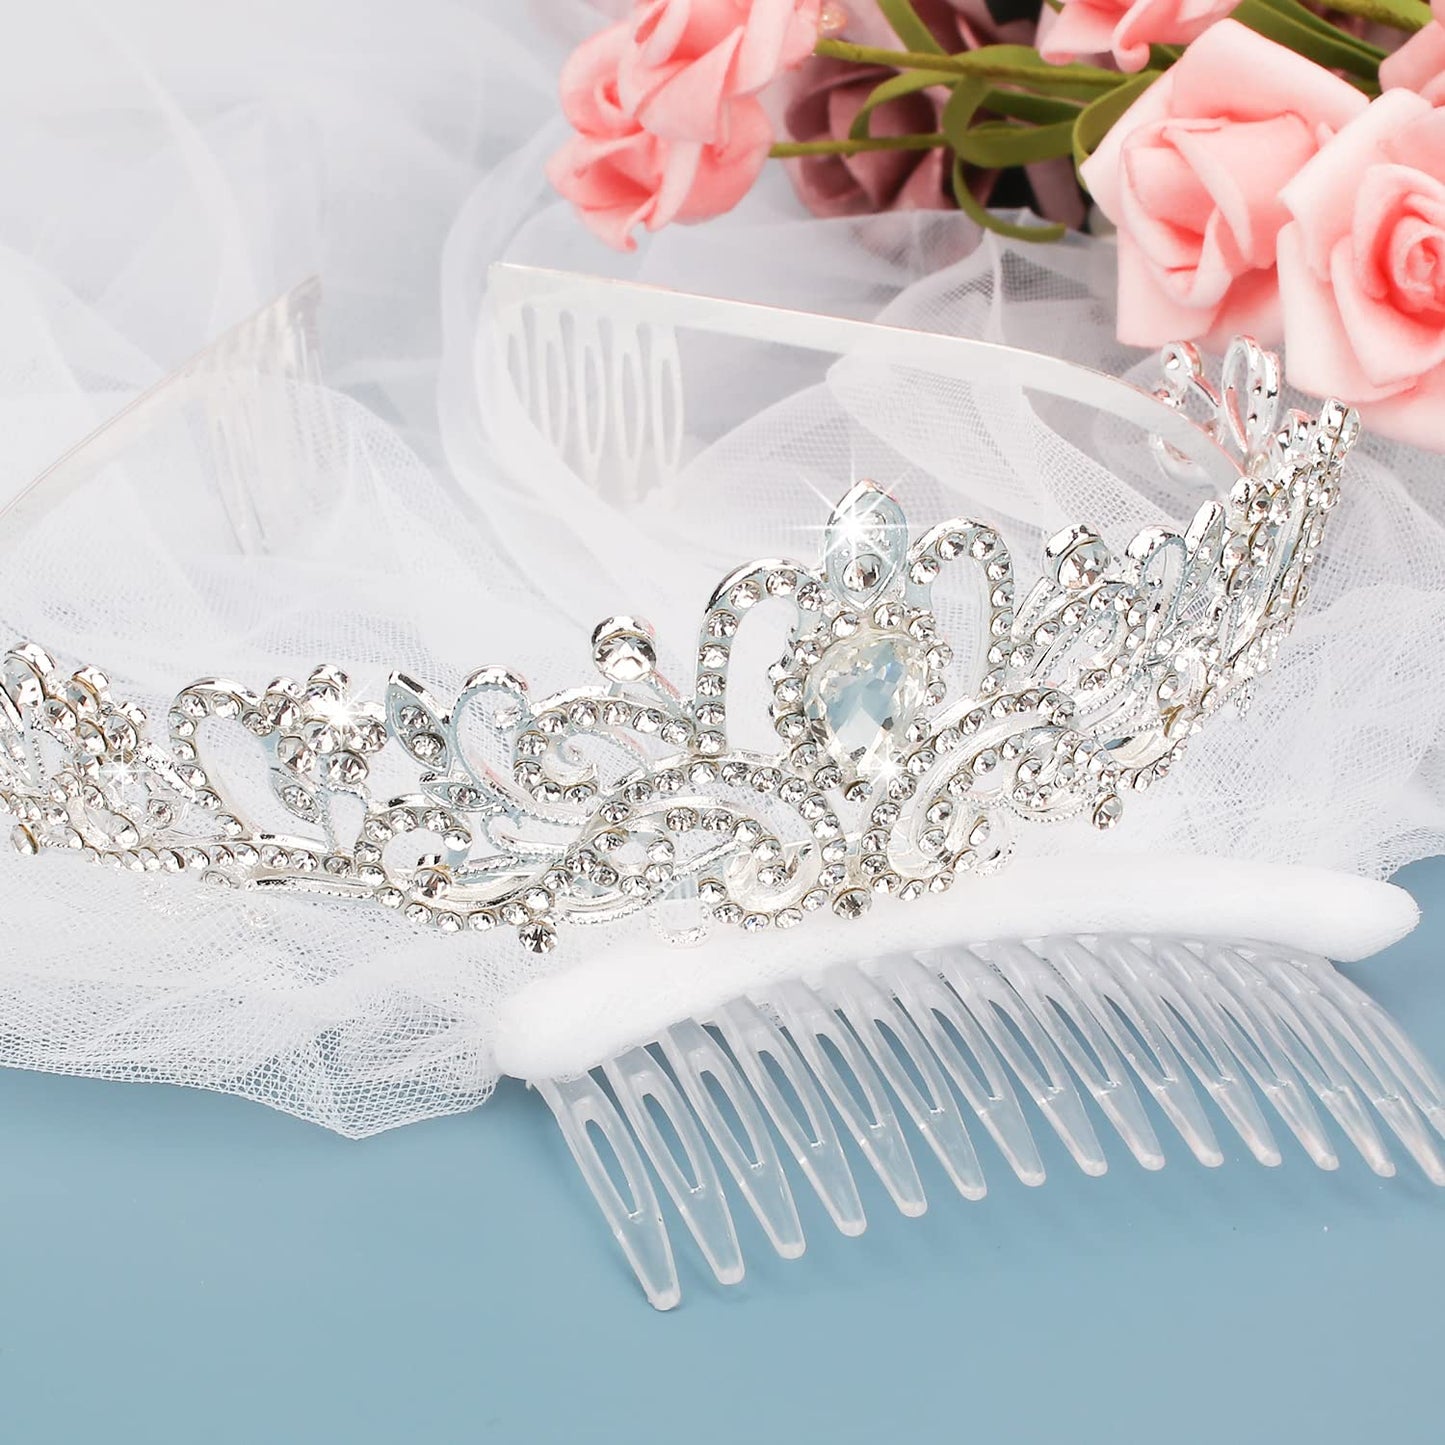 Didder Tiara and Lace Bridal Veil, Wedding Veils and Headpieces for Women, White Veils for Brides Tiaras and Crown for Women, Silver, 2 Piece Set